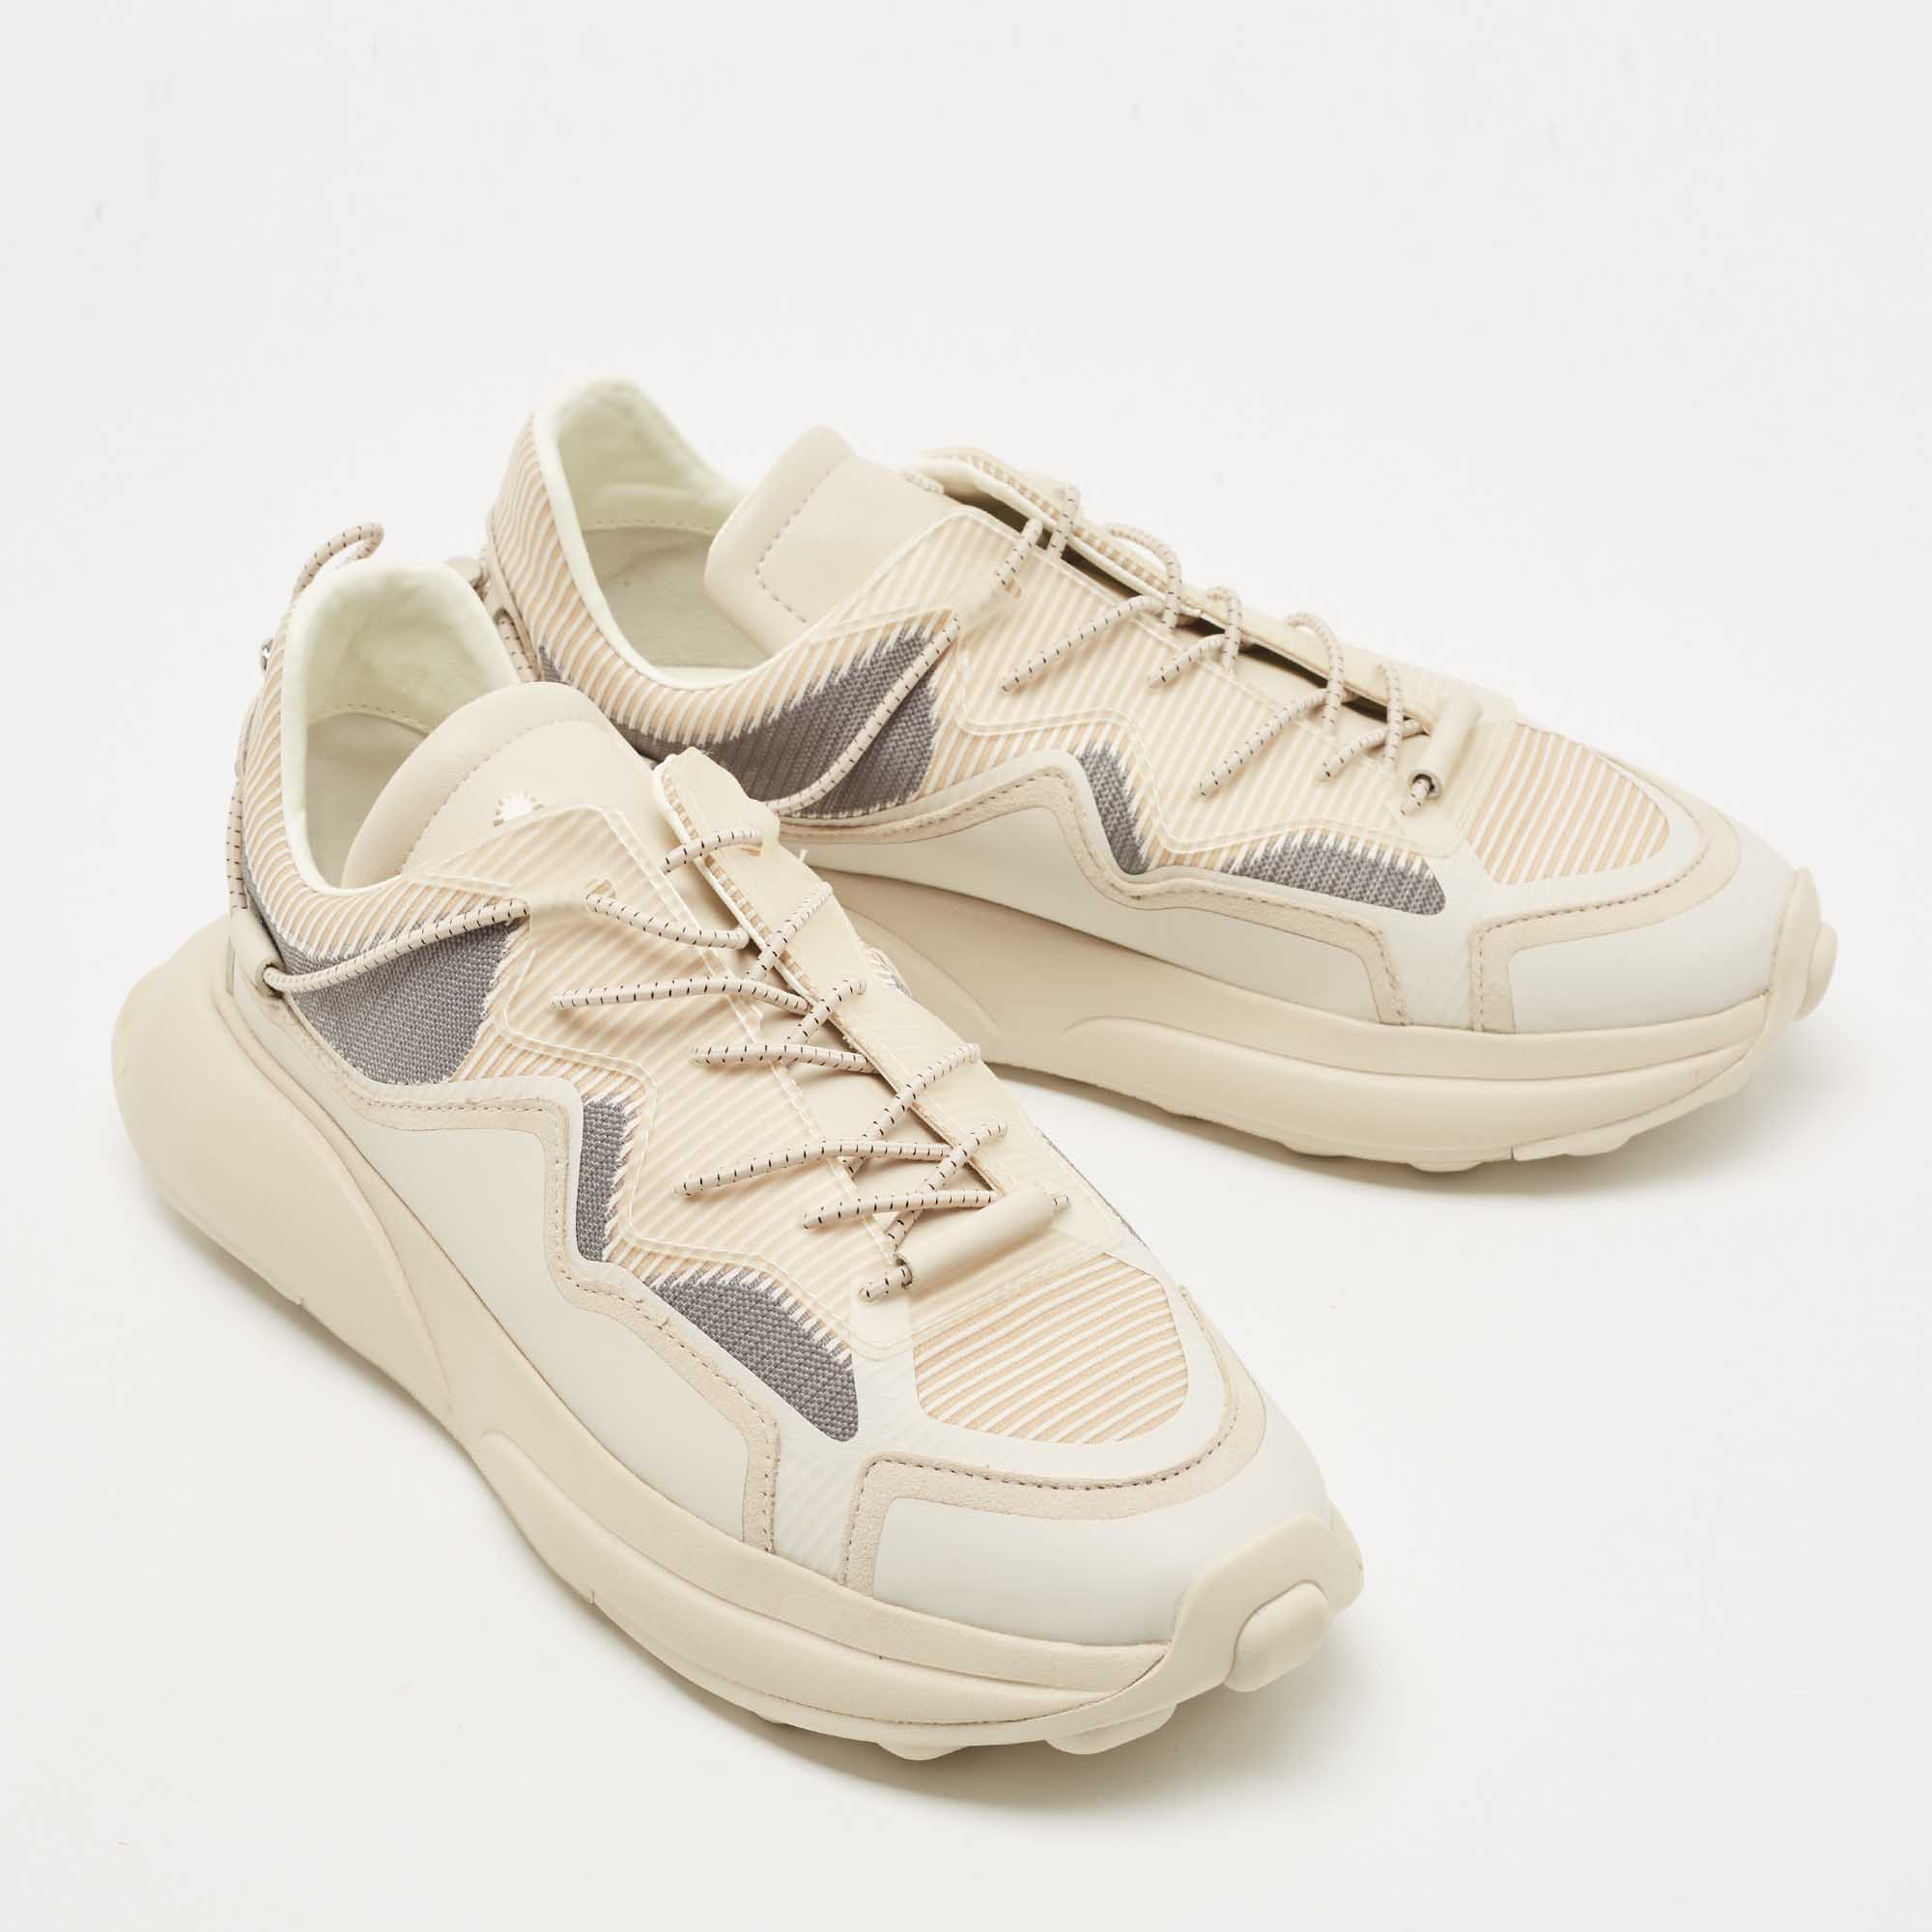 Stuart Weitzman Beige Leather And PVC Low Top Sneakers Size 38